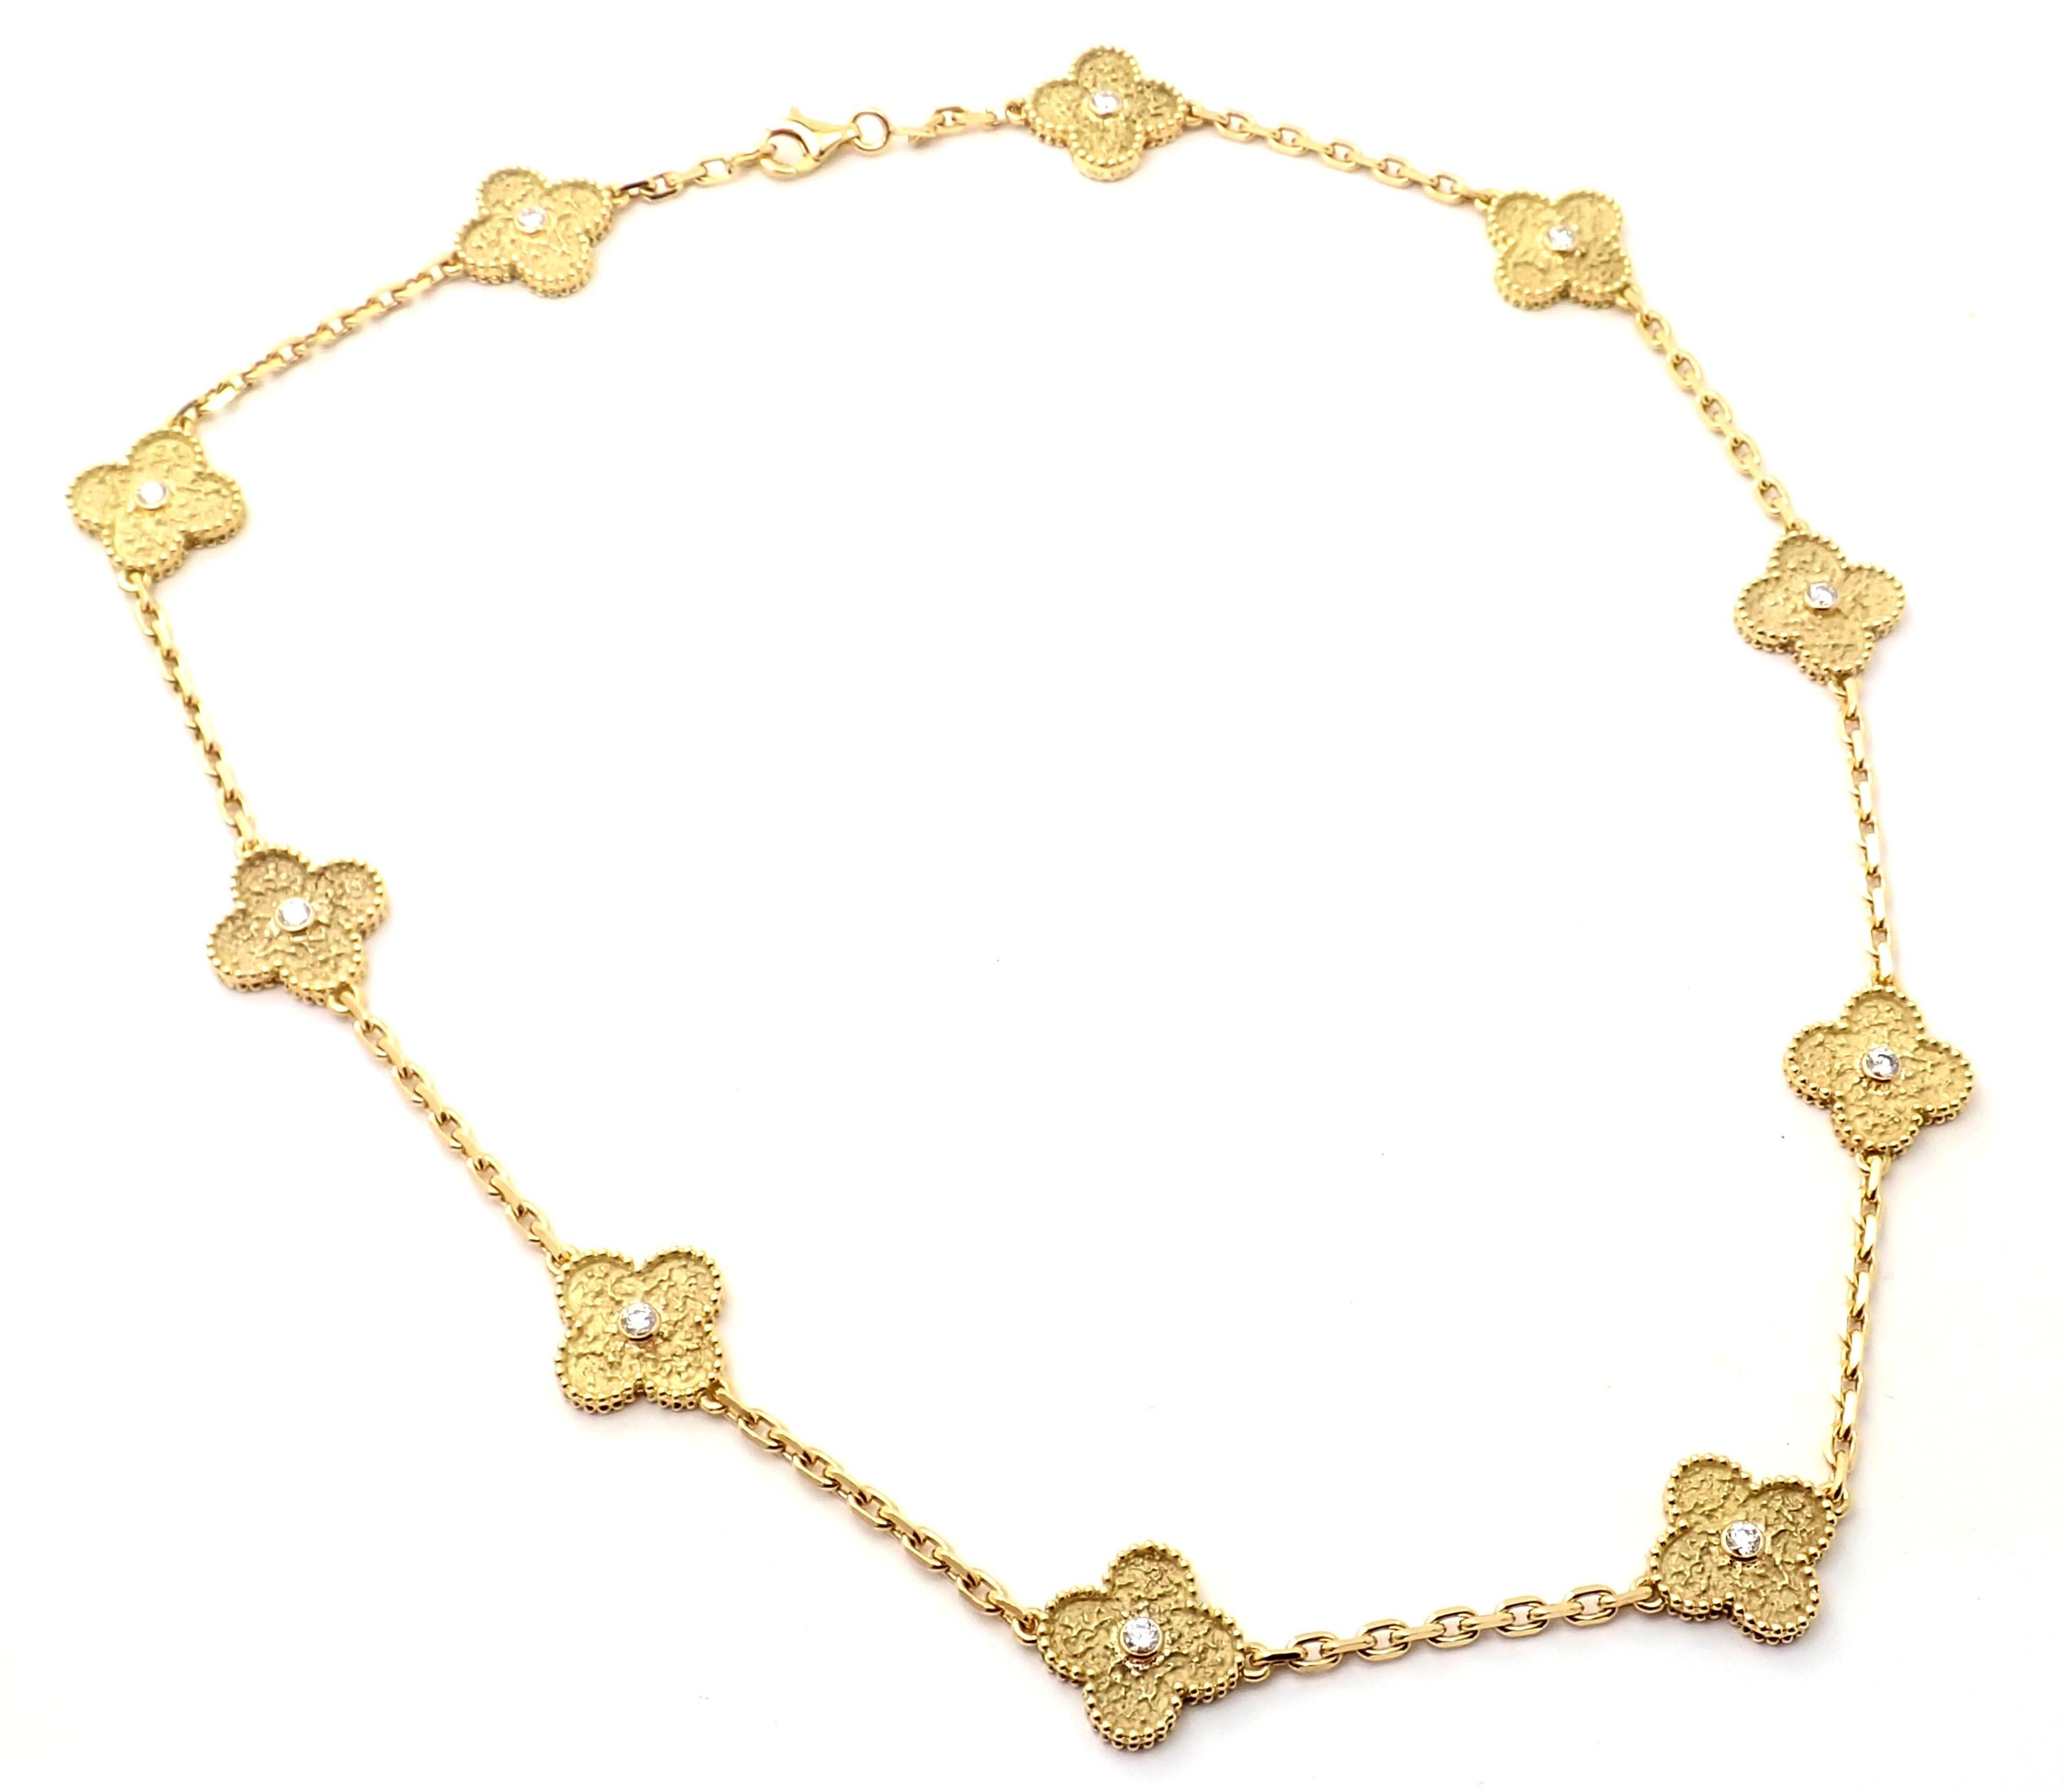 18k Yellow Gold 10 Motif Diamond Vintage Alhambra Necklace by Van Cleef & Arpels.
With 10 round brilliant cut diamond VVS1 clarity, 
E color total weight .60ct 
Details:
Length: 16 1/4